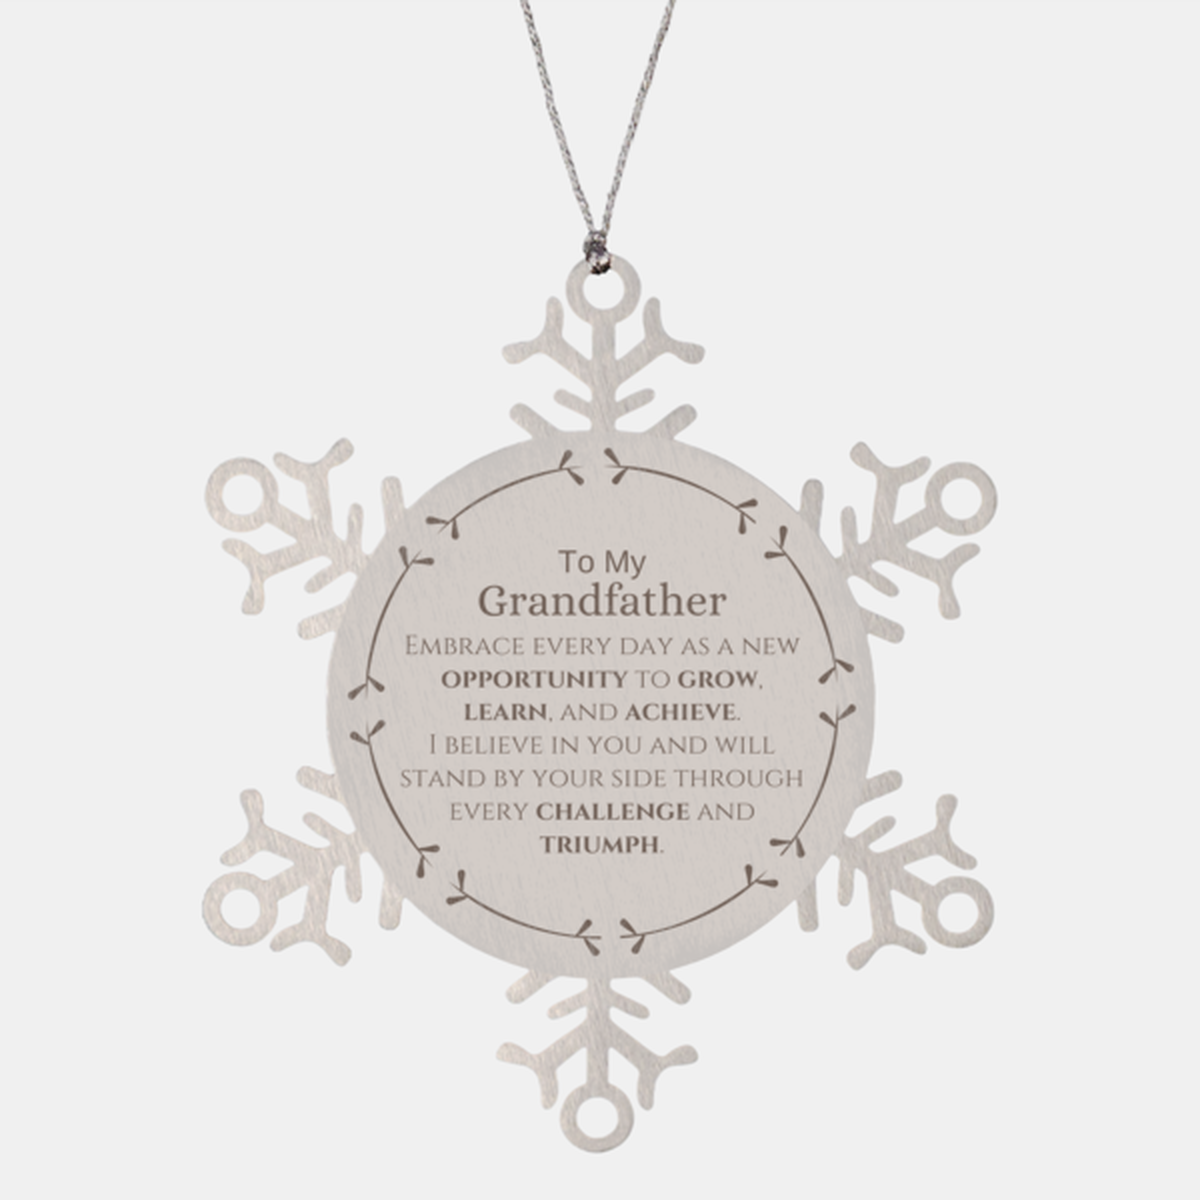 To My Grandfather Gifts, I believe in you and will stand by your side, Inspirational Snowflake Ornament For Grandfather, Birthday Christmas Motivational Grandfather Gifts